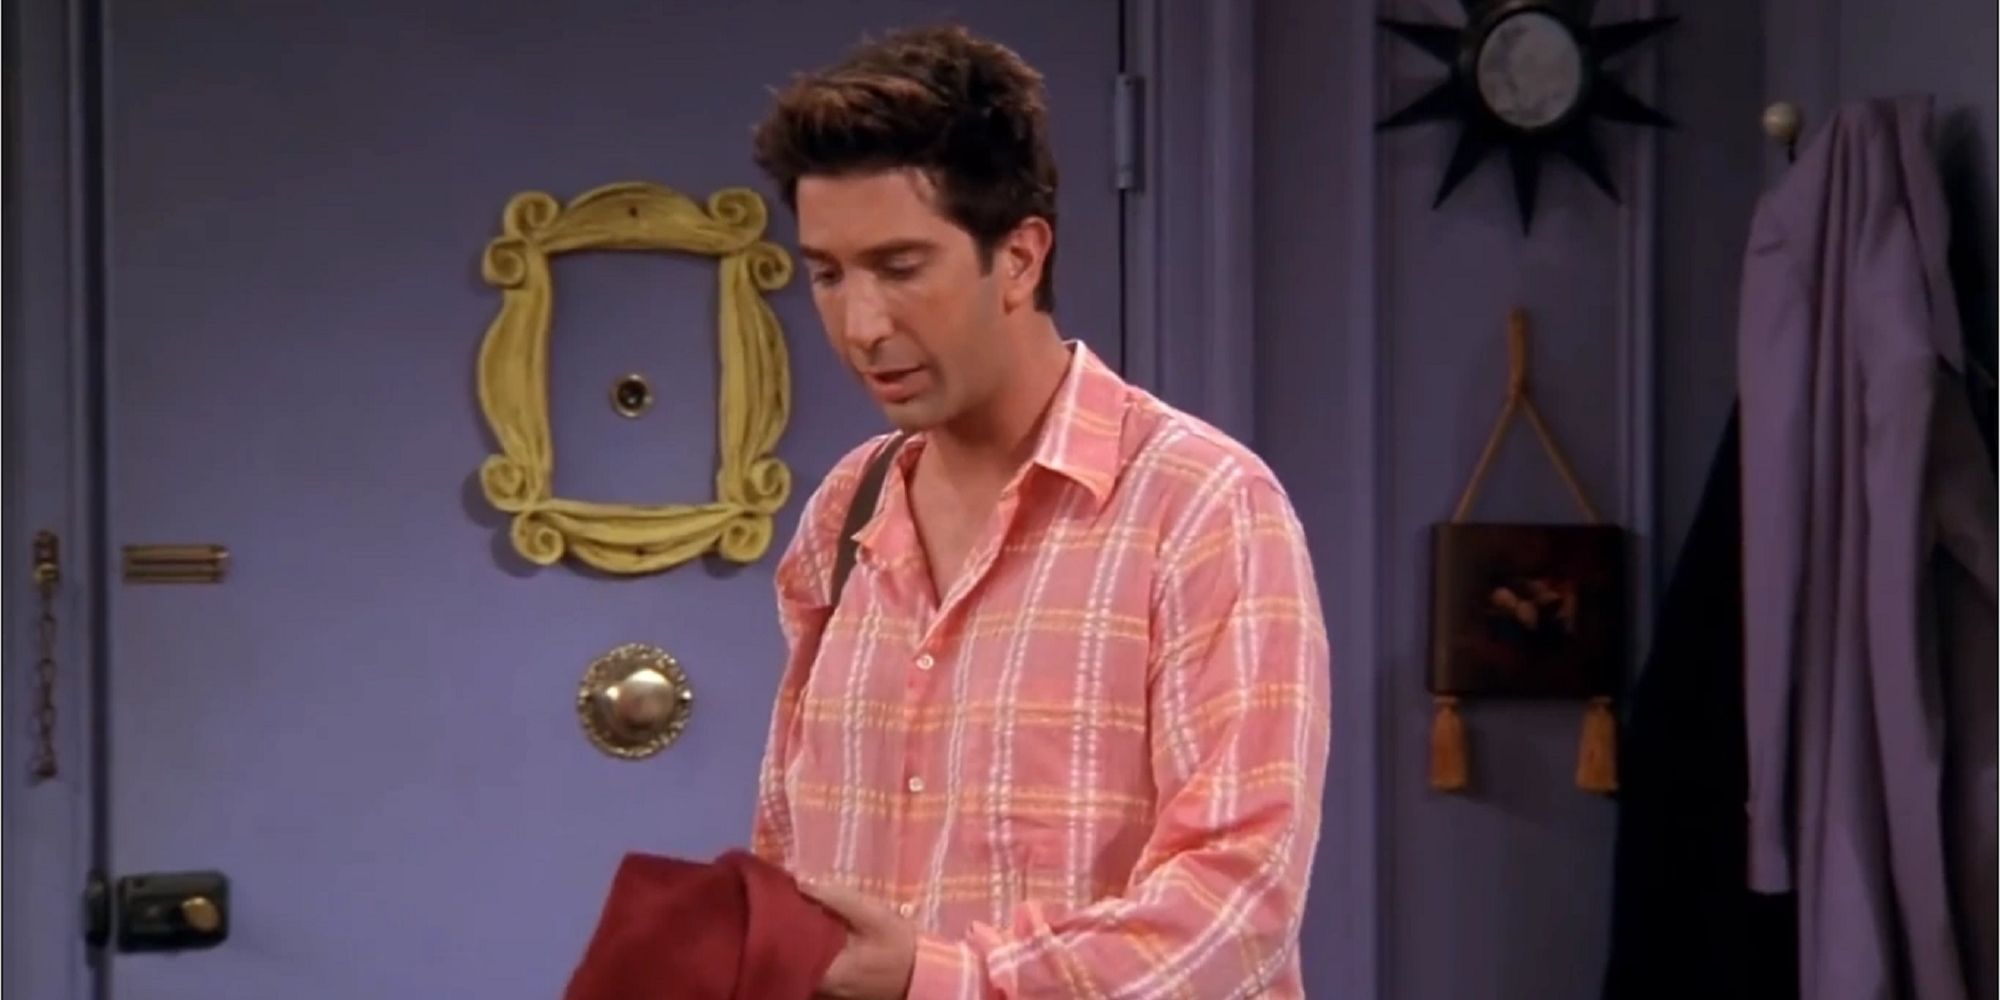 Ross holding a red sweater